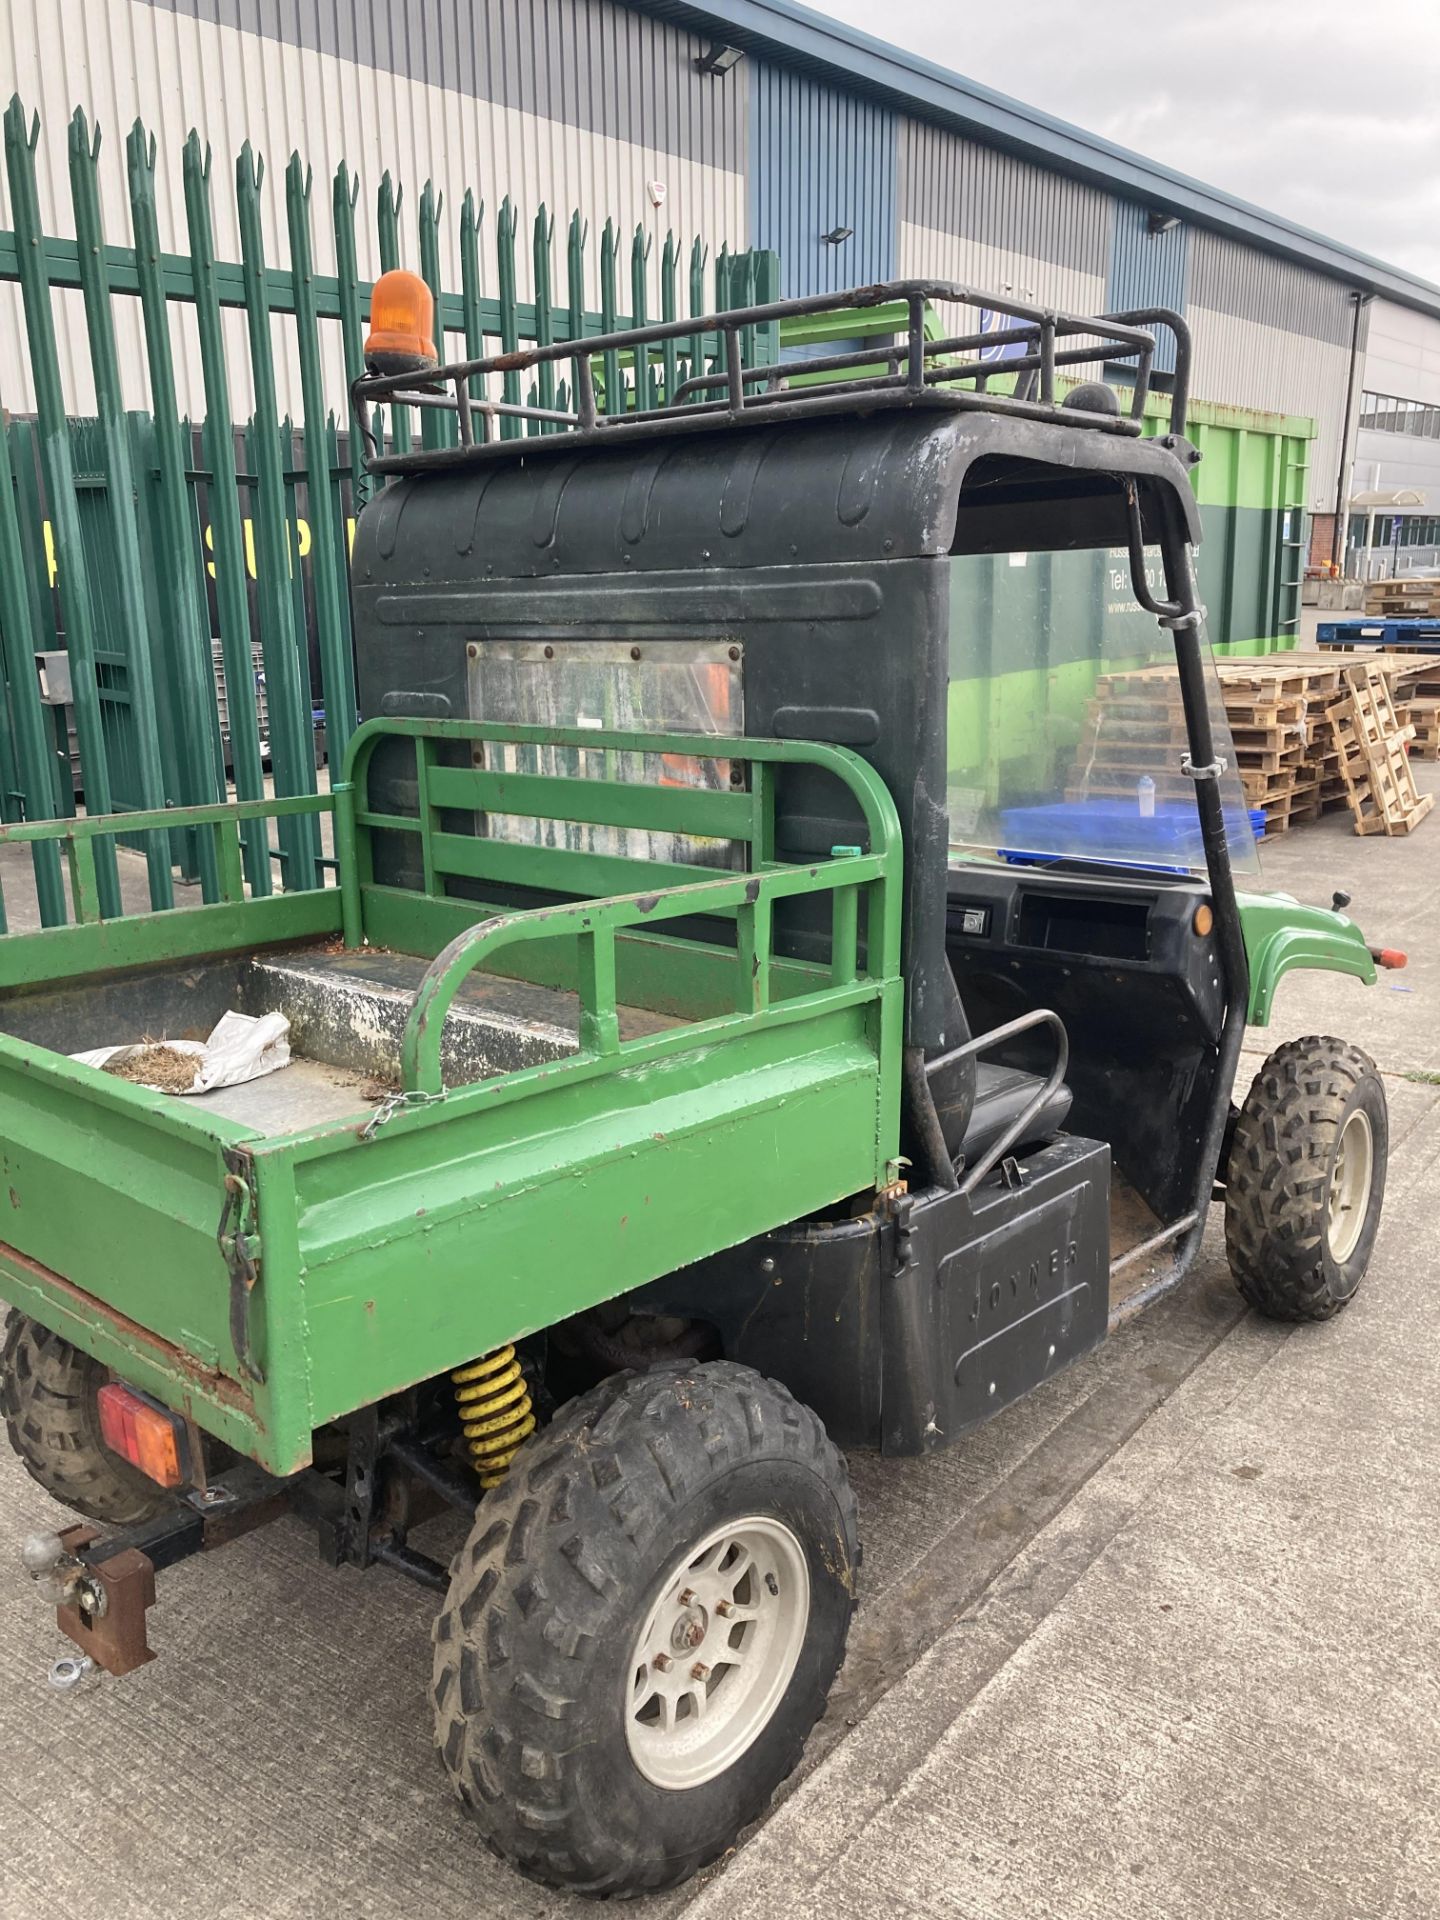 JOYNER JNSZ65OUV 4WD off road vehicle - petrol - green - manual tipper body - complete with manual. - Image 4 of 15